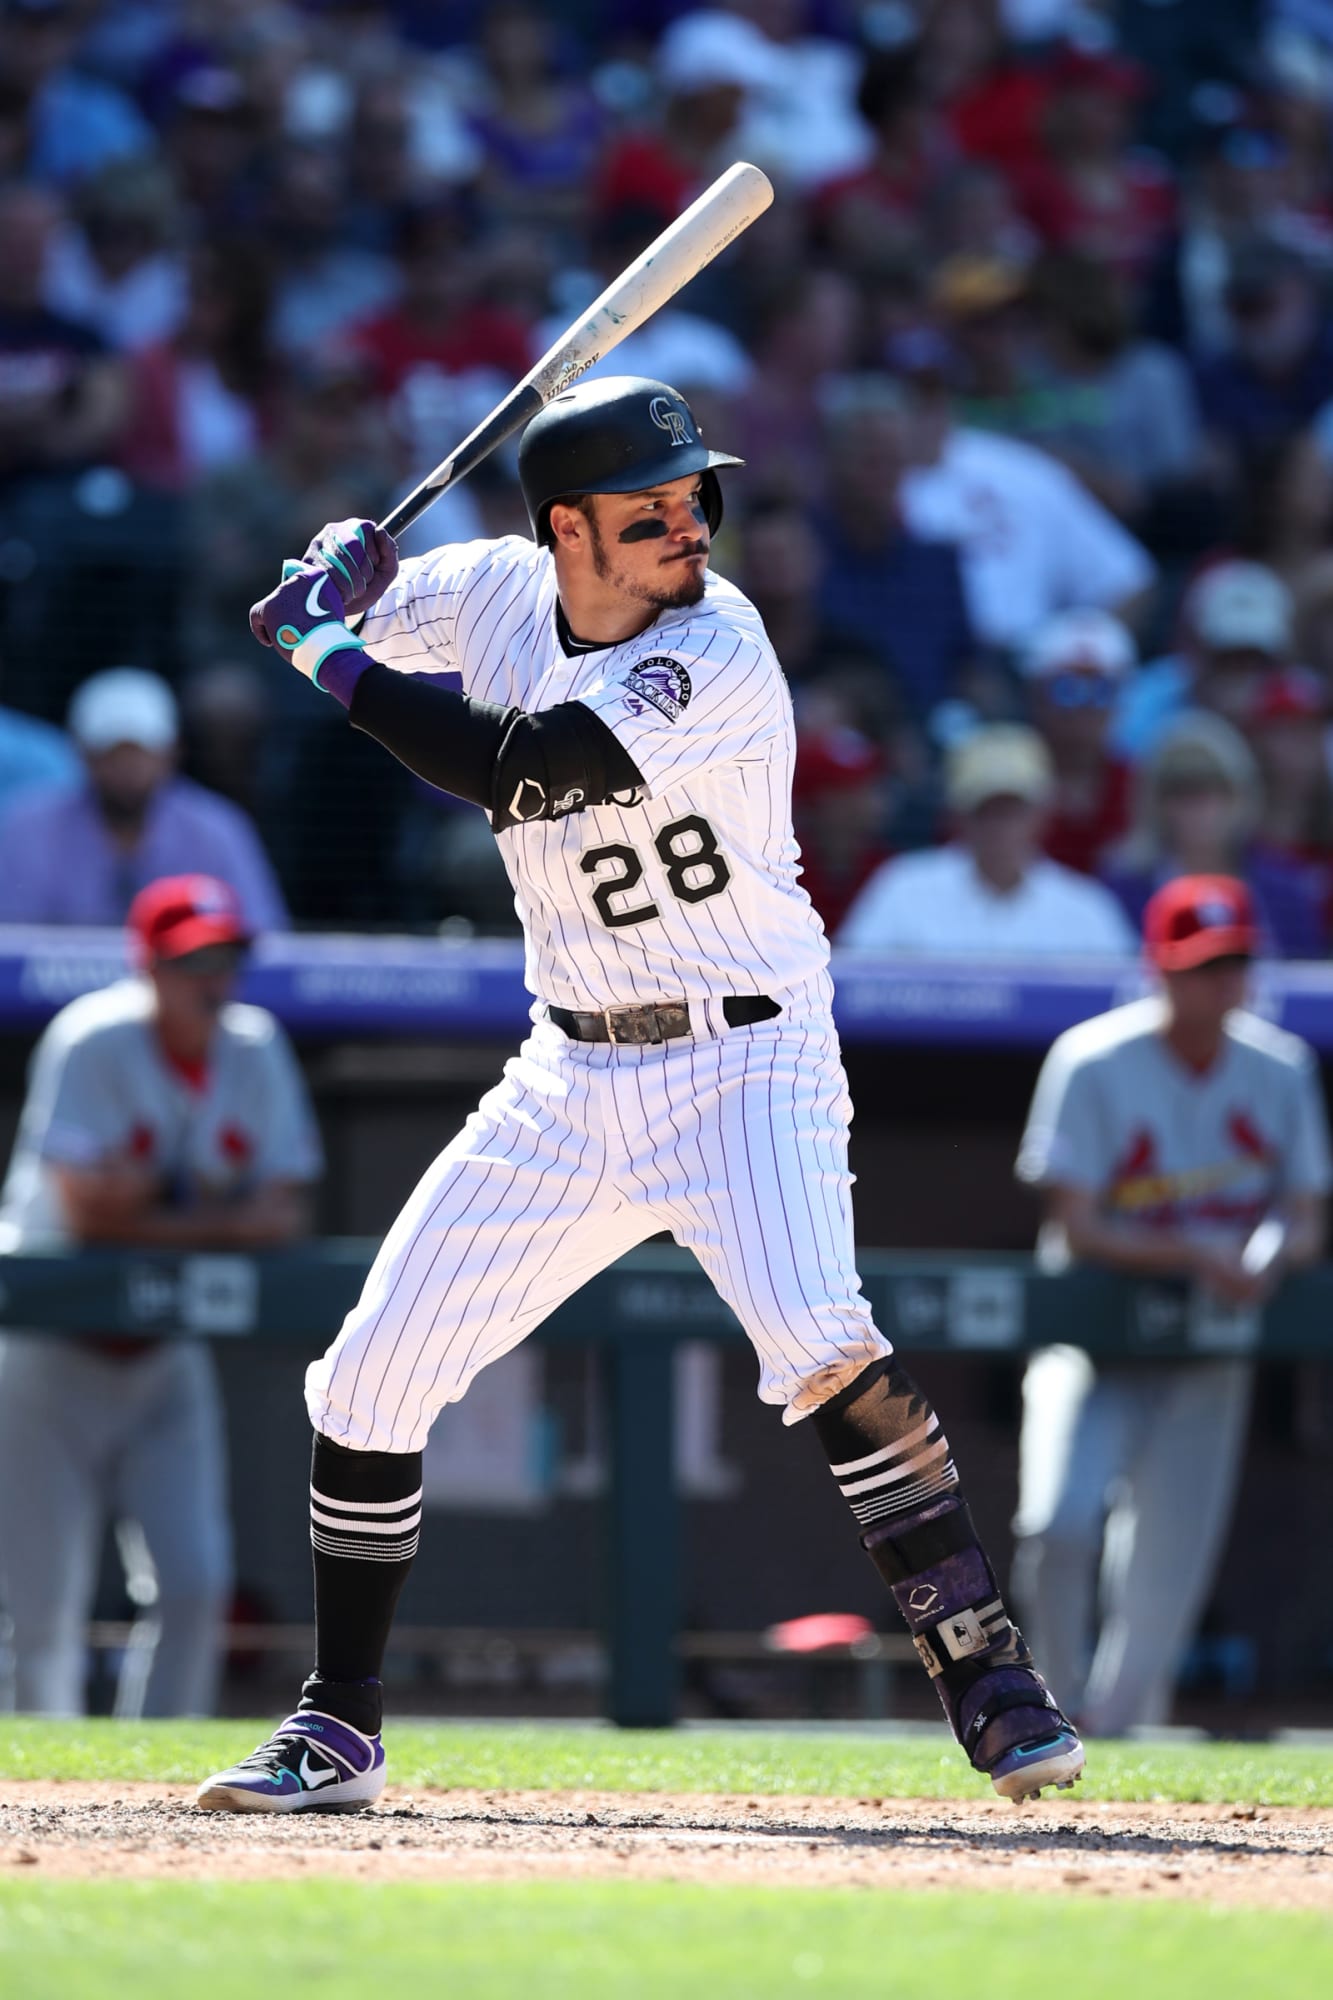 Colorado Rockies: The 2020 roster may have a problem with balance